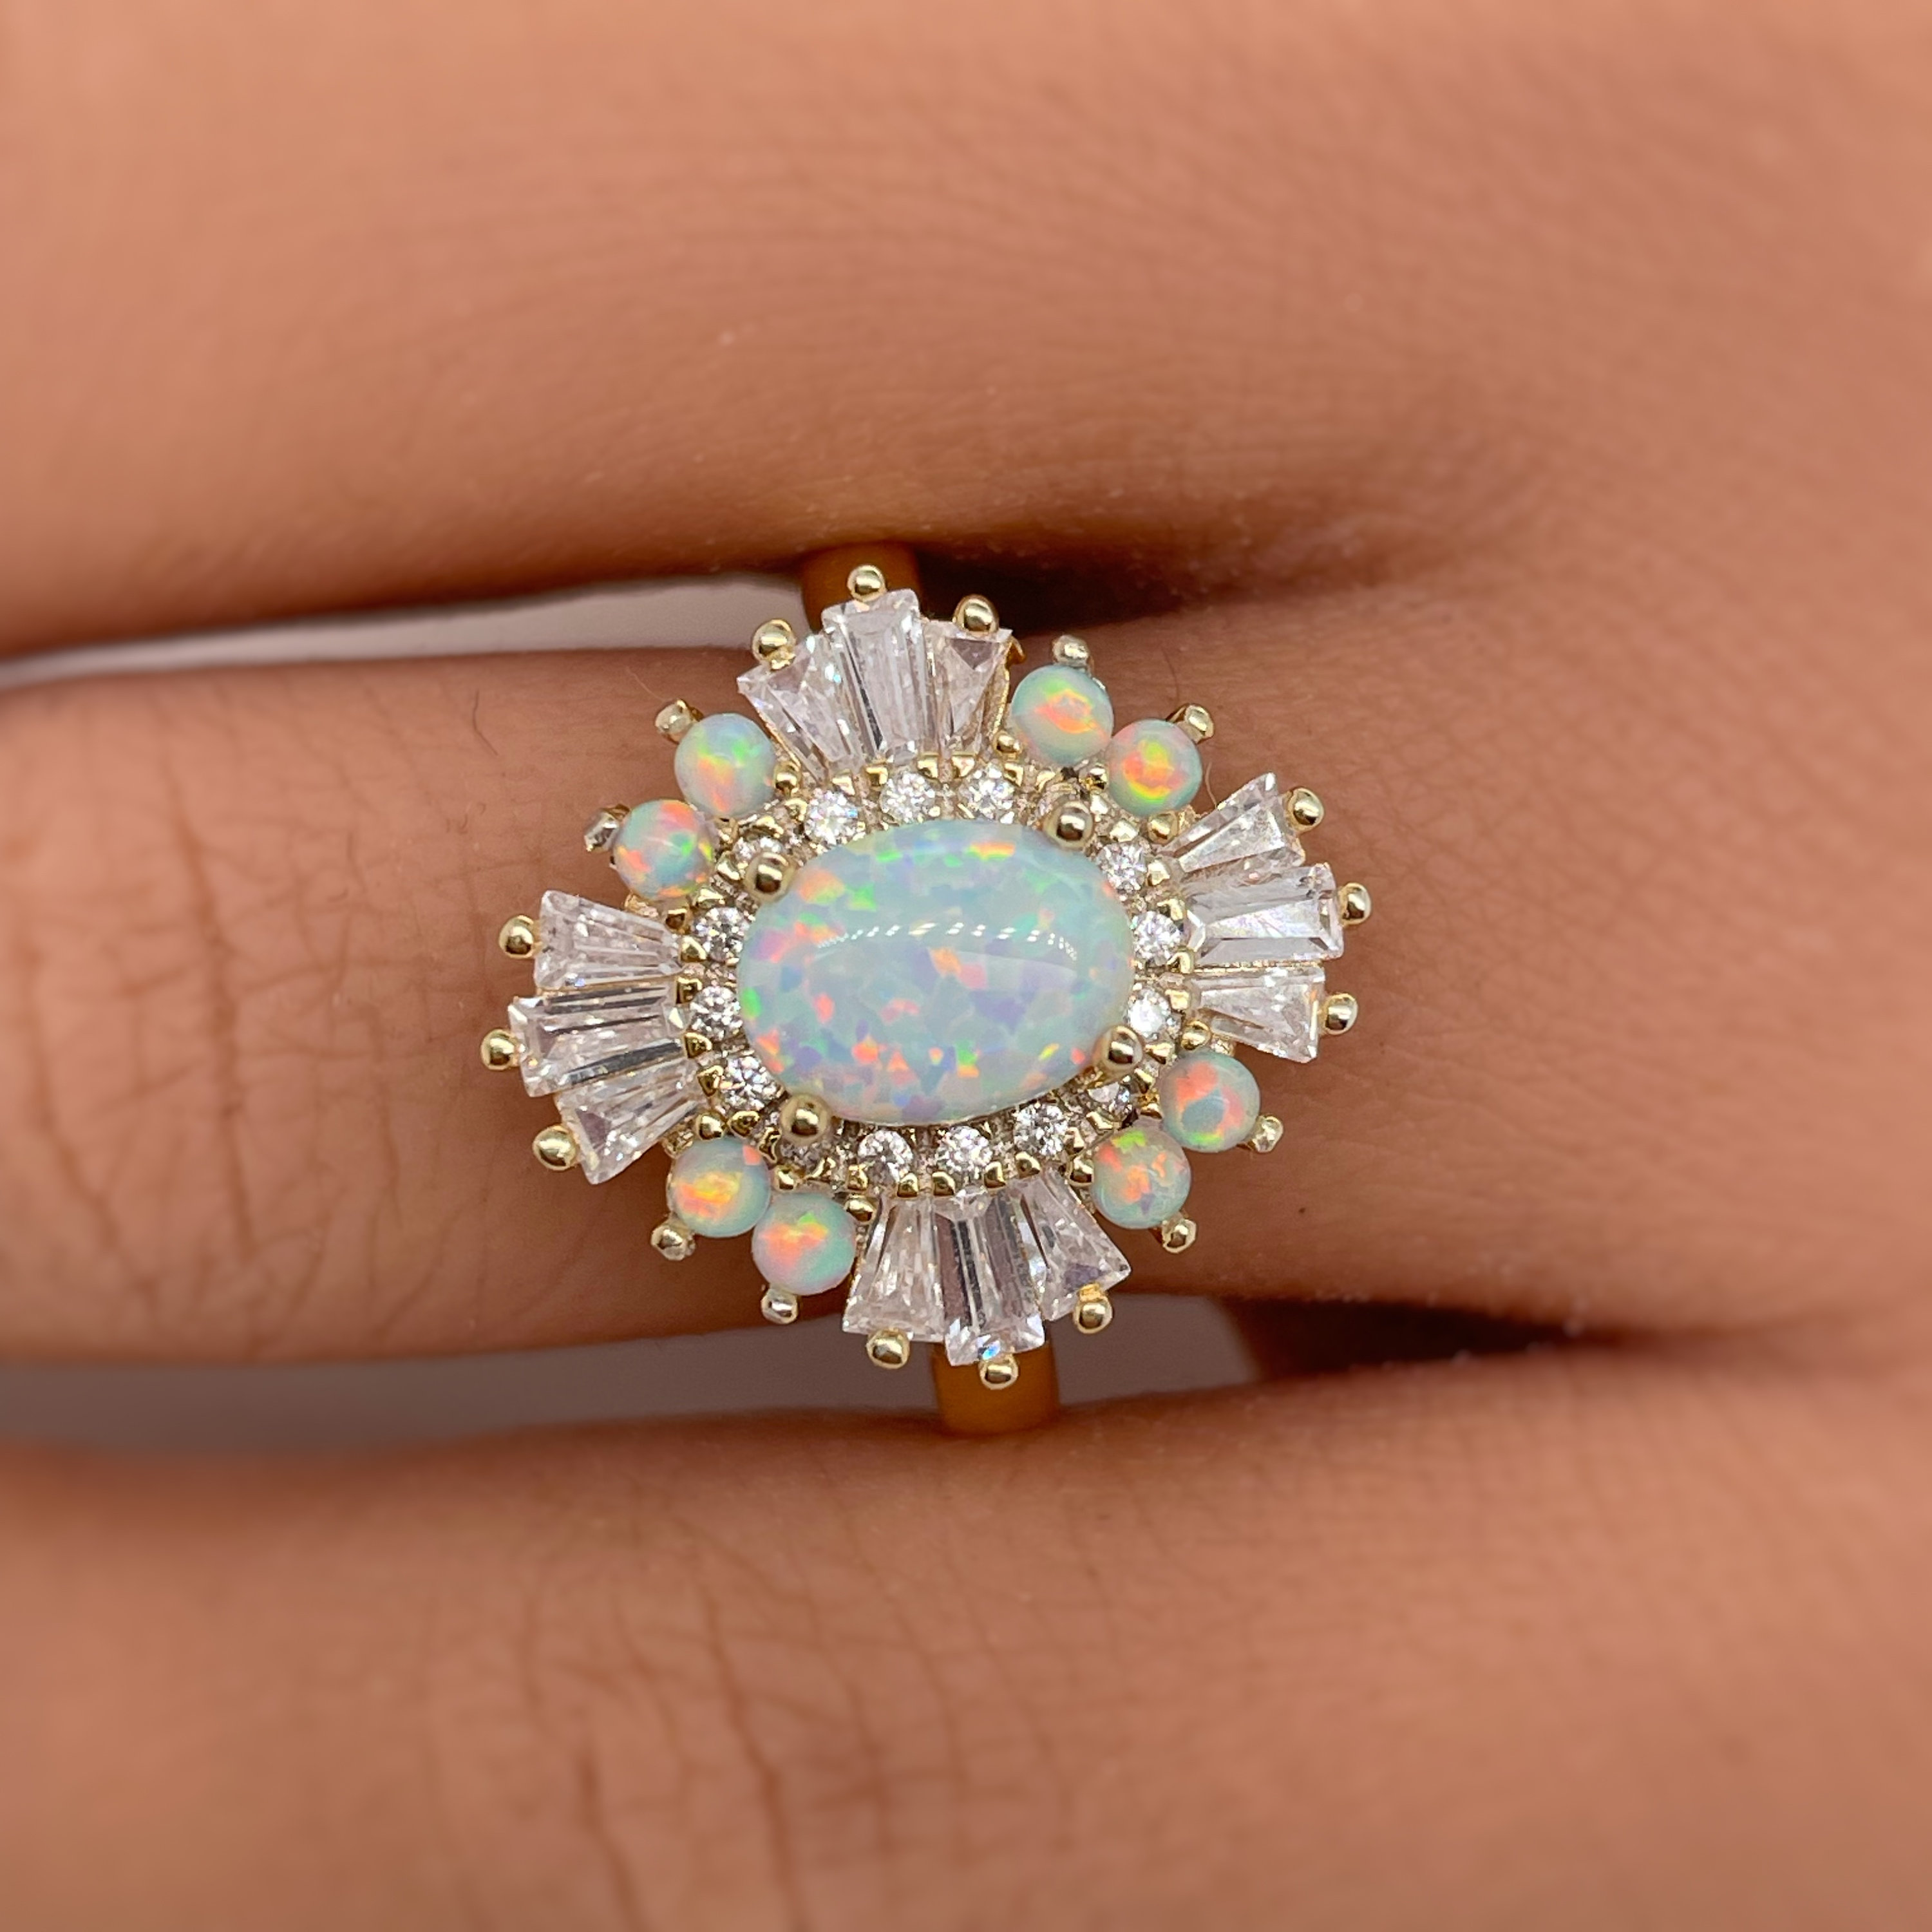 3ct Oval Cut Opal Sapphire Engagement Ring